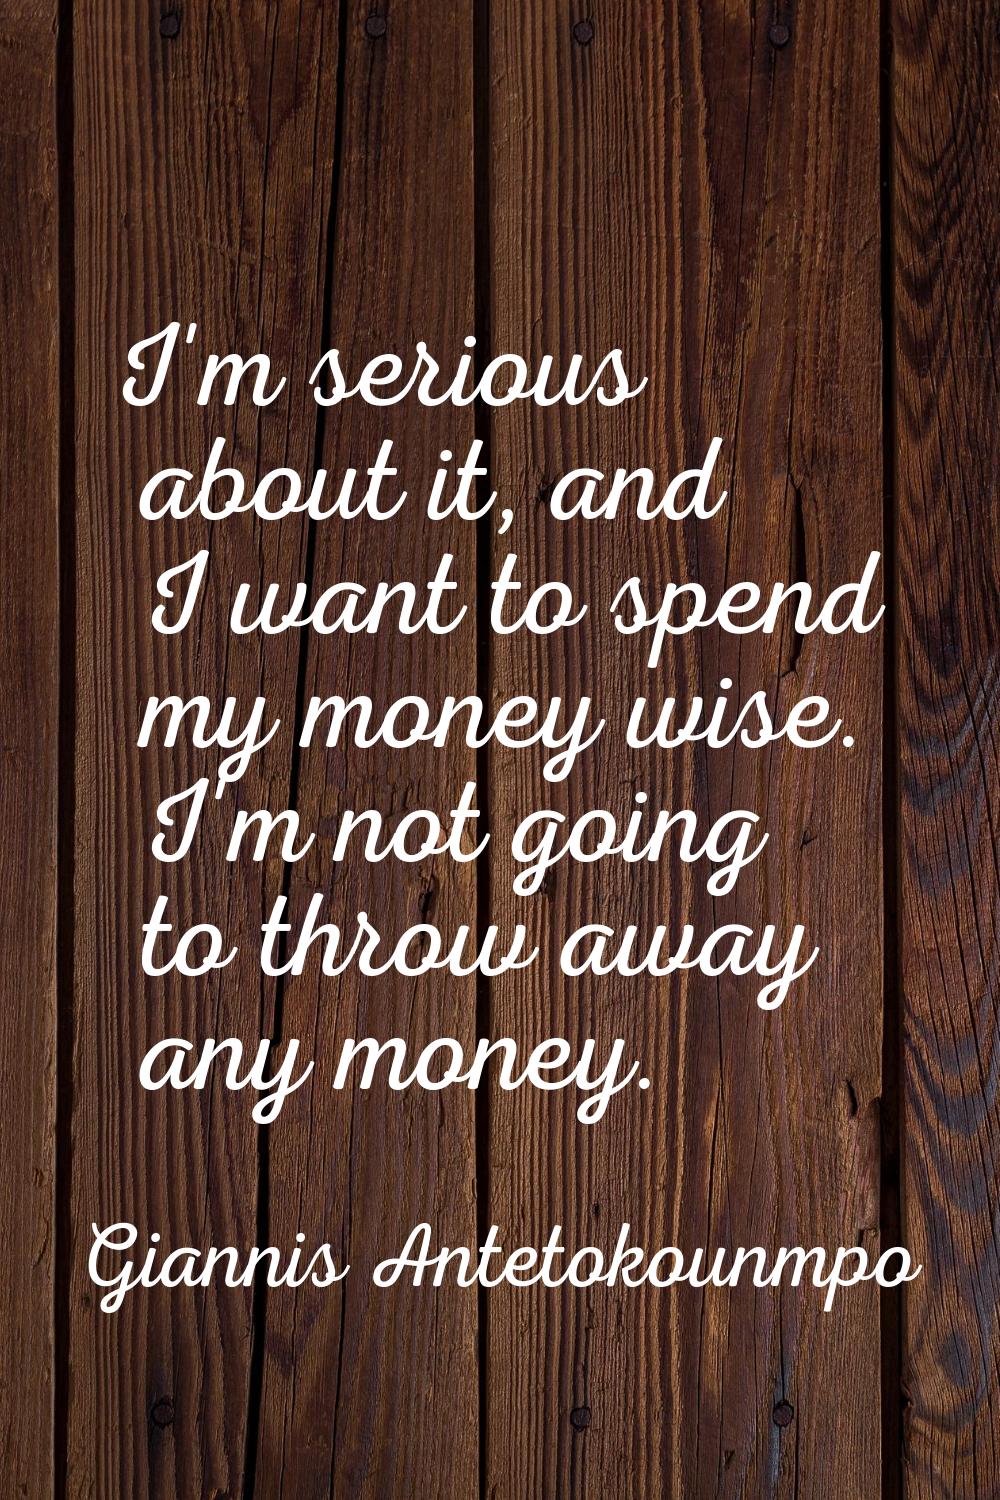 I'm serious about it, and I want to spend my money wise. I'm not going to throw away any money.